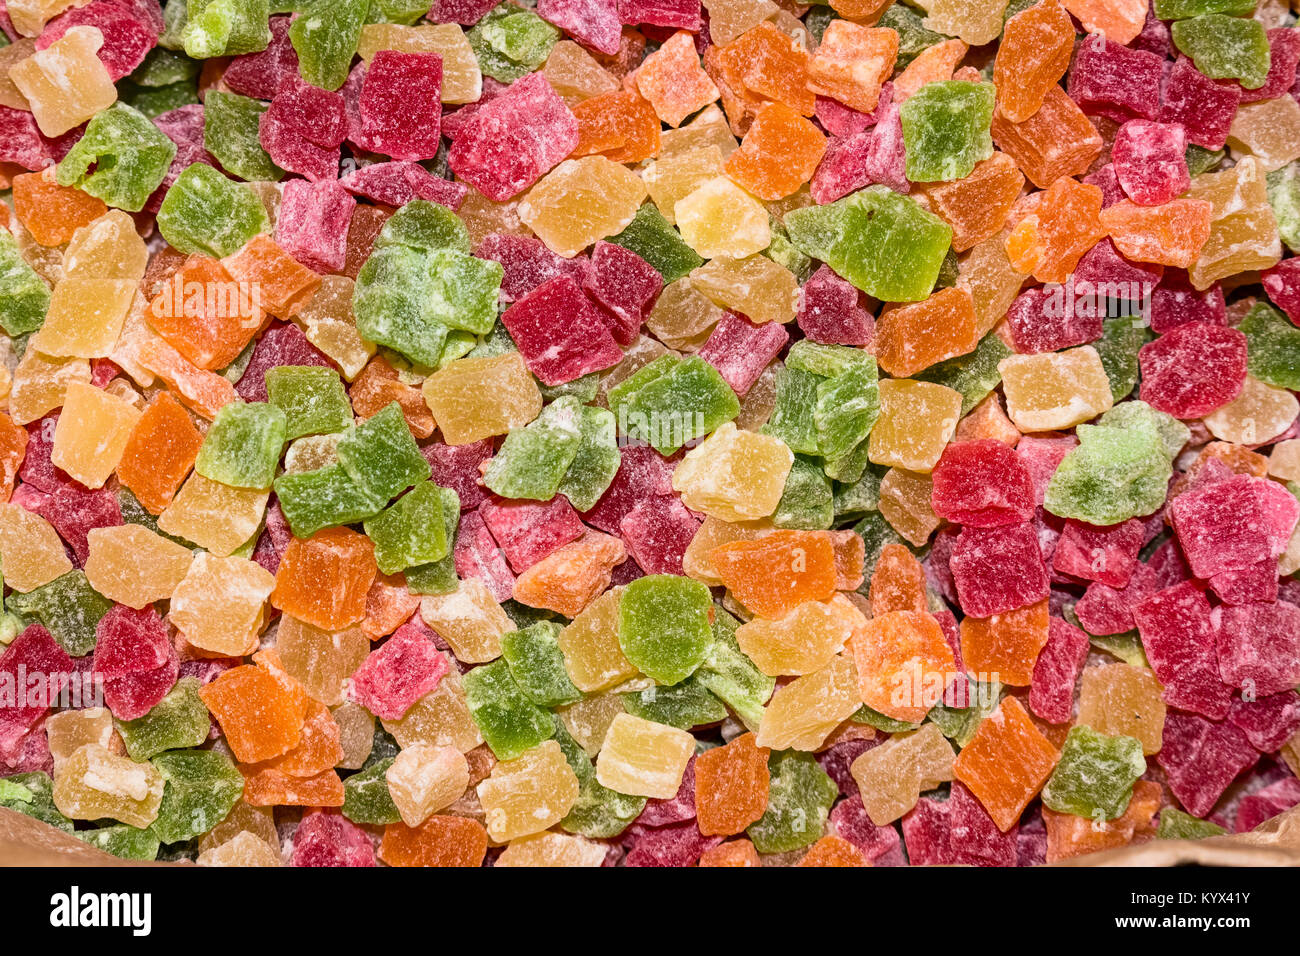 dry melon fruit on a pile on a food market, coloful dry fruits, dried fruits, Stock Photo